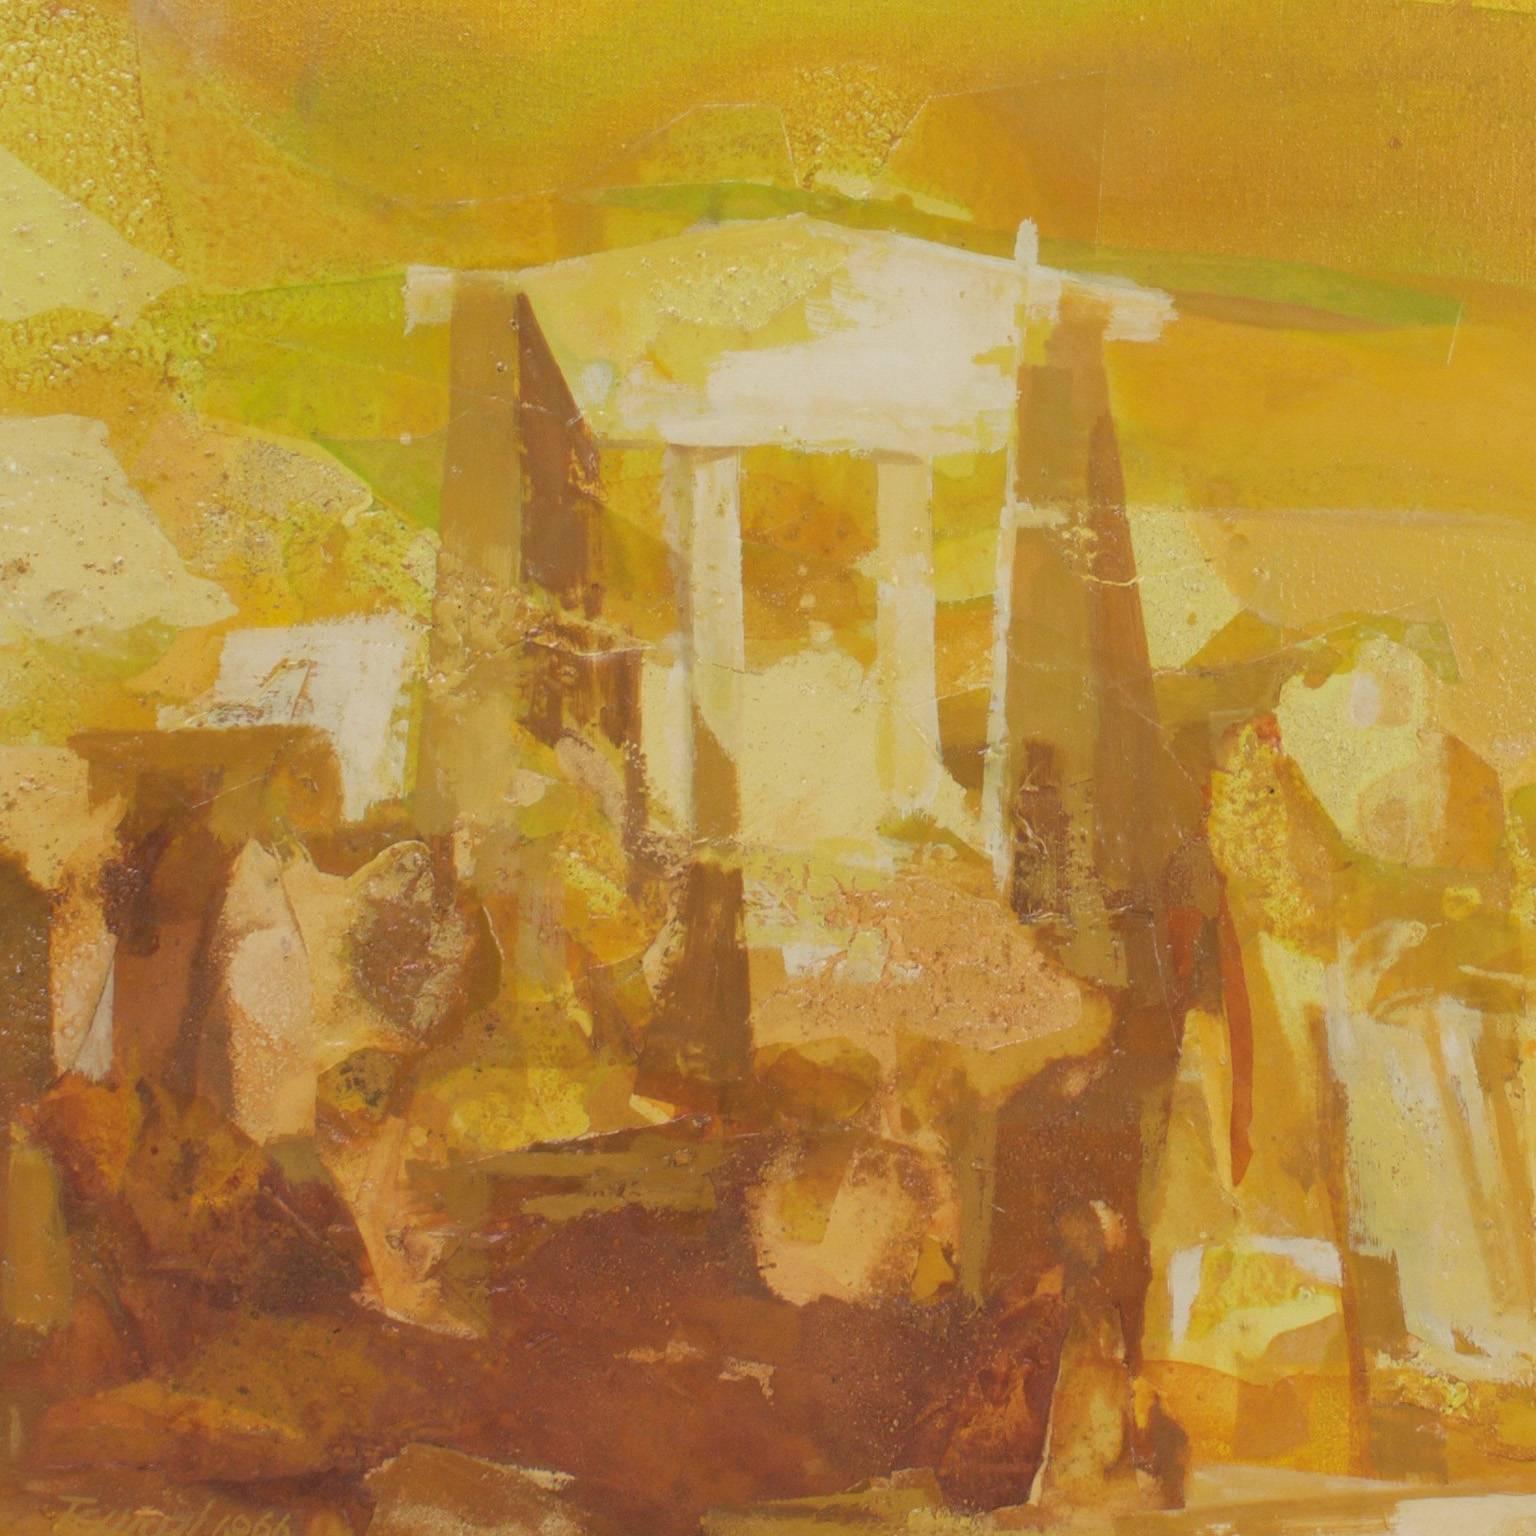 Dreamy impressionist painting with a striking, hot palette. Titled Aegean Temple on the original gallery tag and presented in the period, silver leaf frame.

